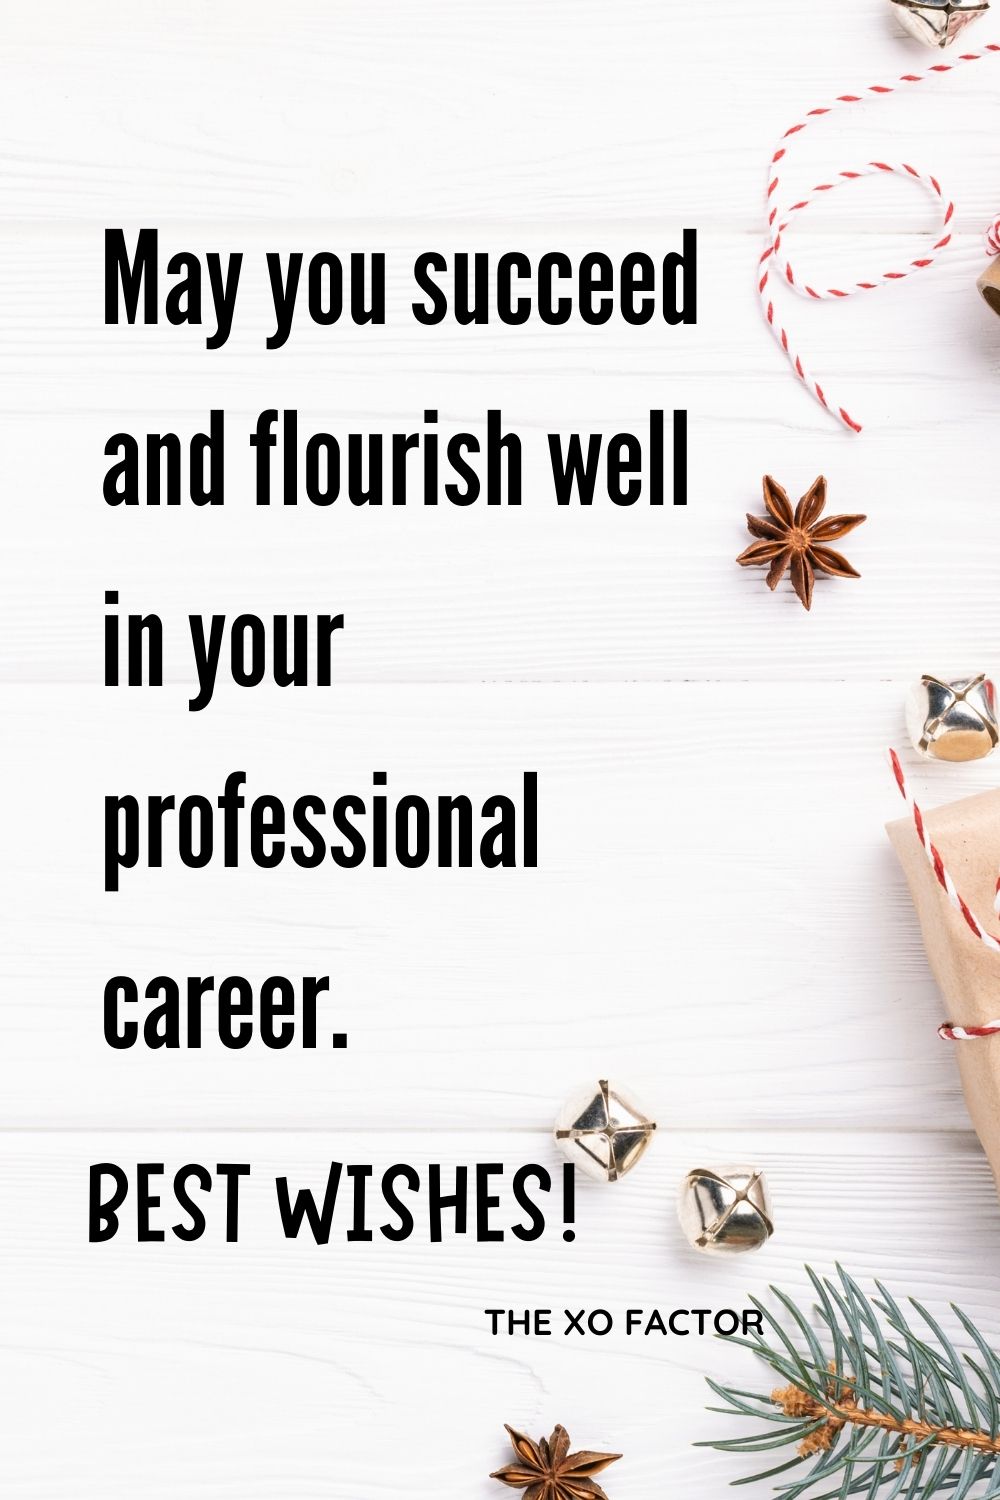 May you succeed and flourish well in your professional career. Best wishes!